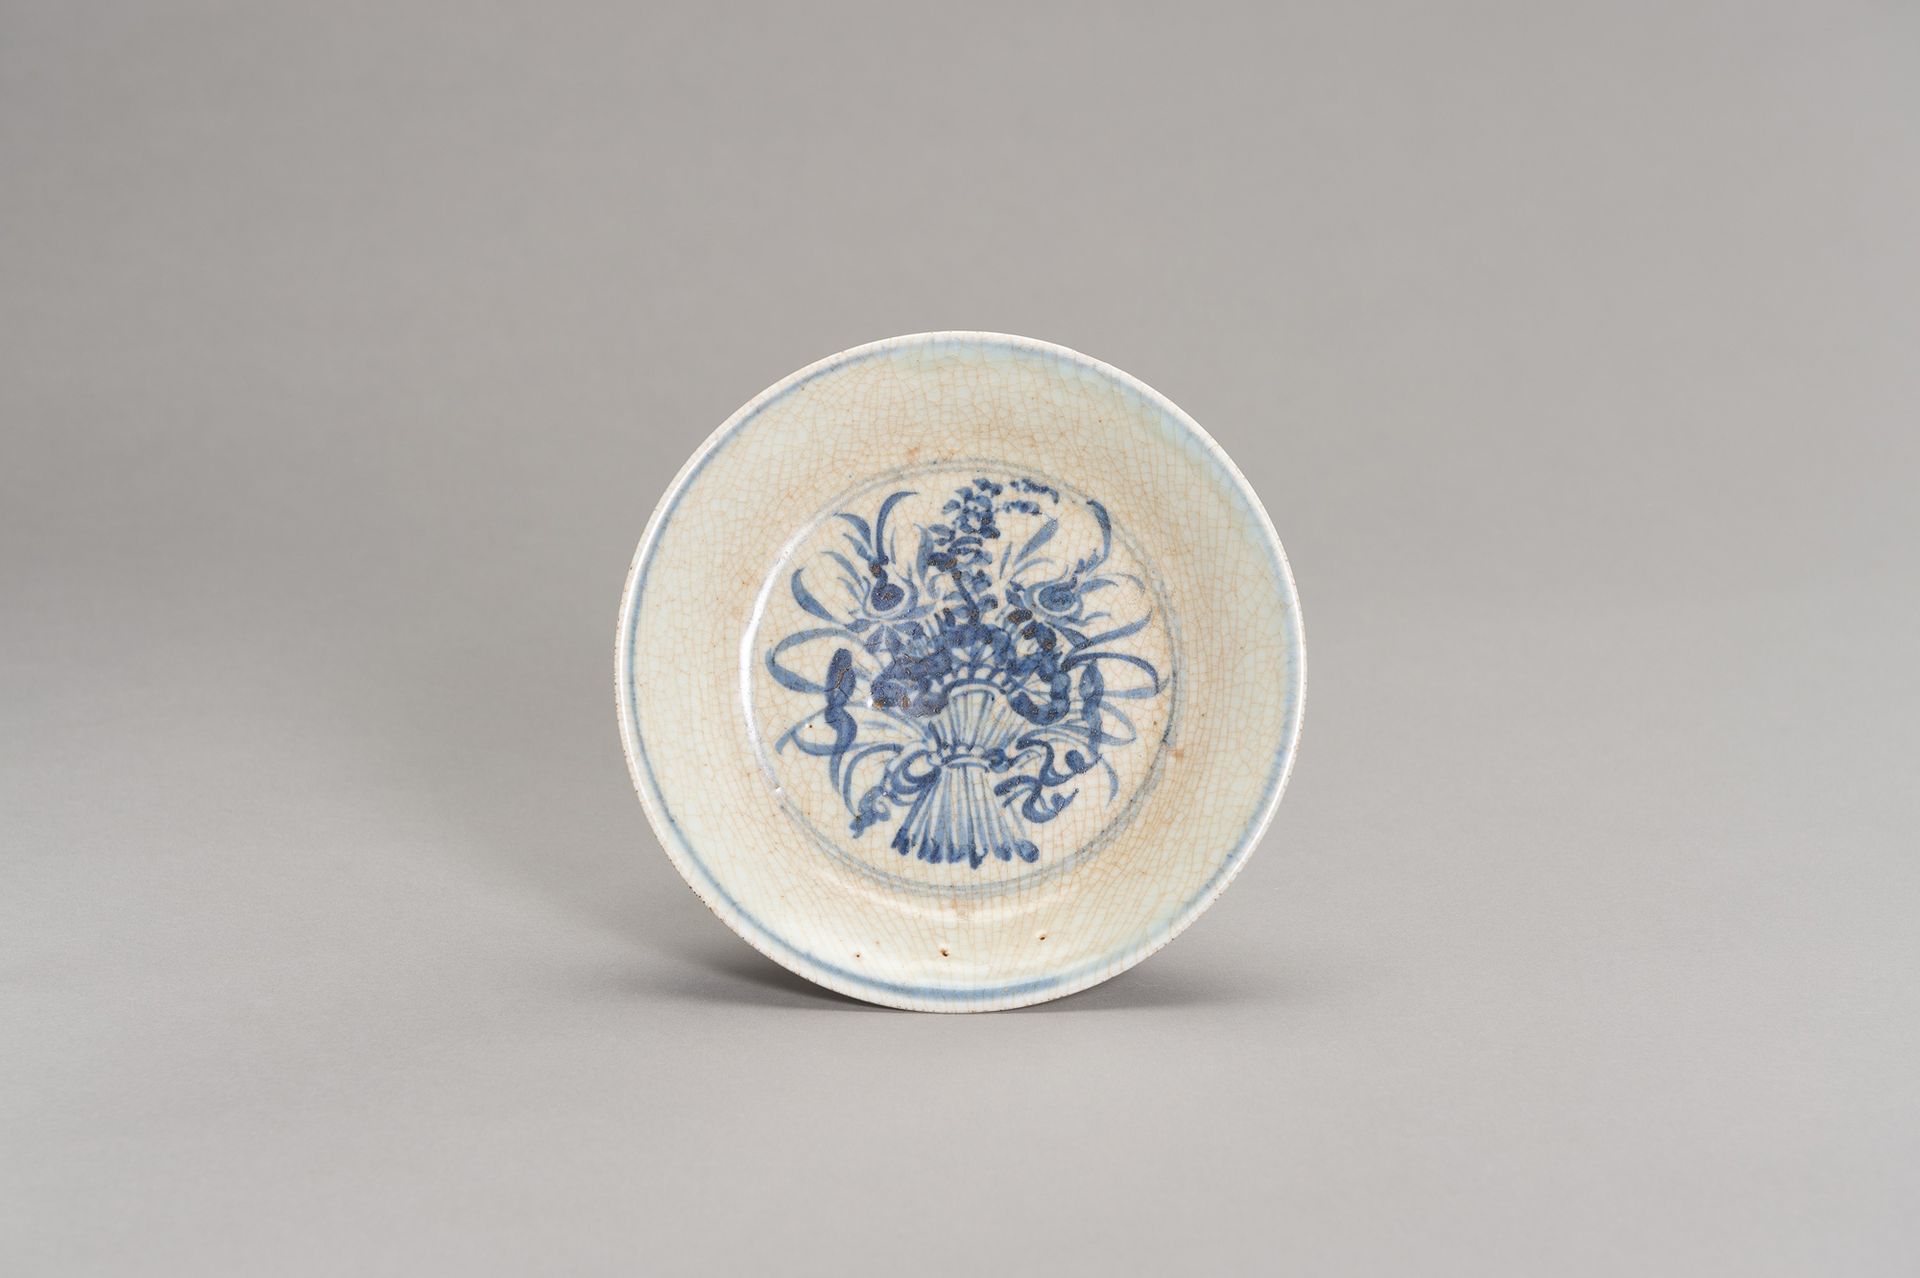 A CELADON AND BLUE DISH WITH A FLOWER BOUQUET 青花瓷和蓝色花束盘
中国，清朝（1644-1912）。这只优雅的盘子&hellip;